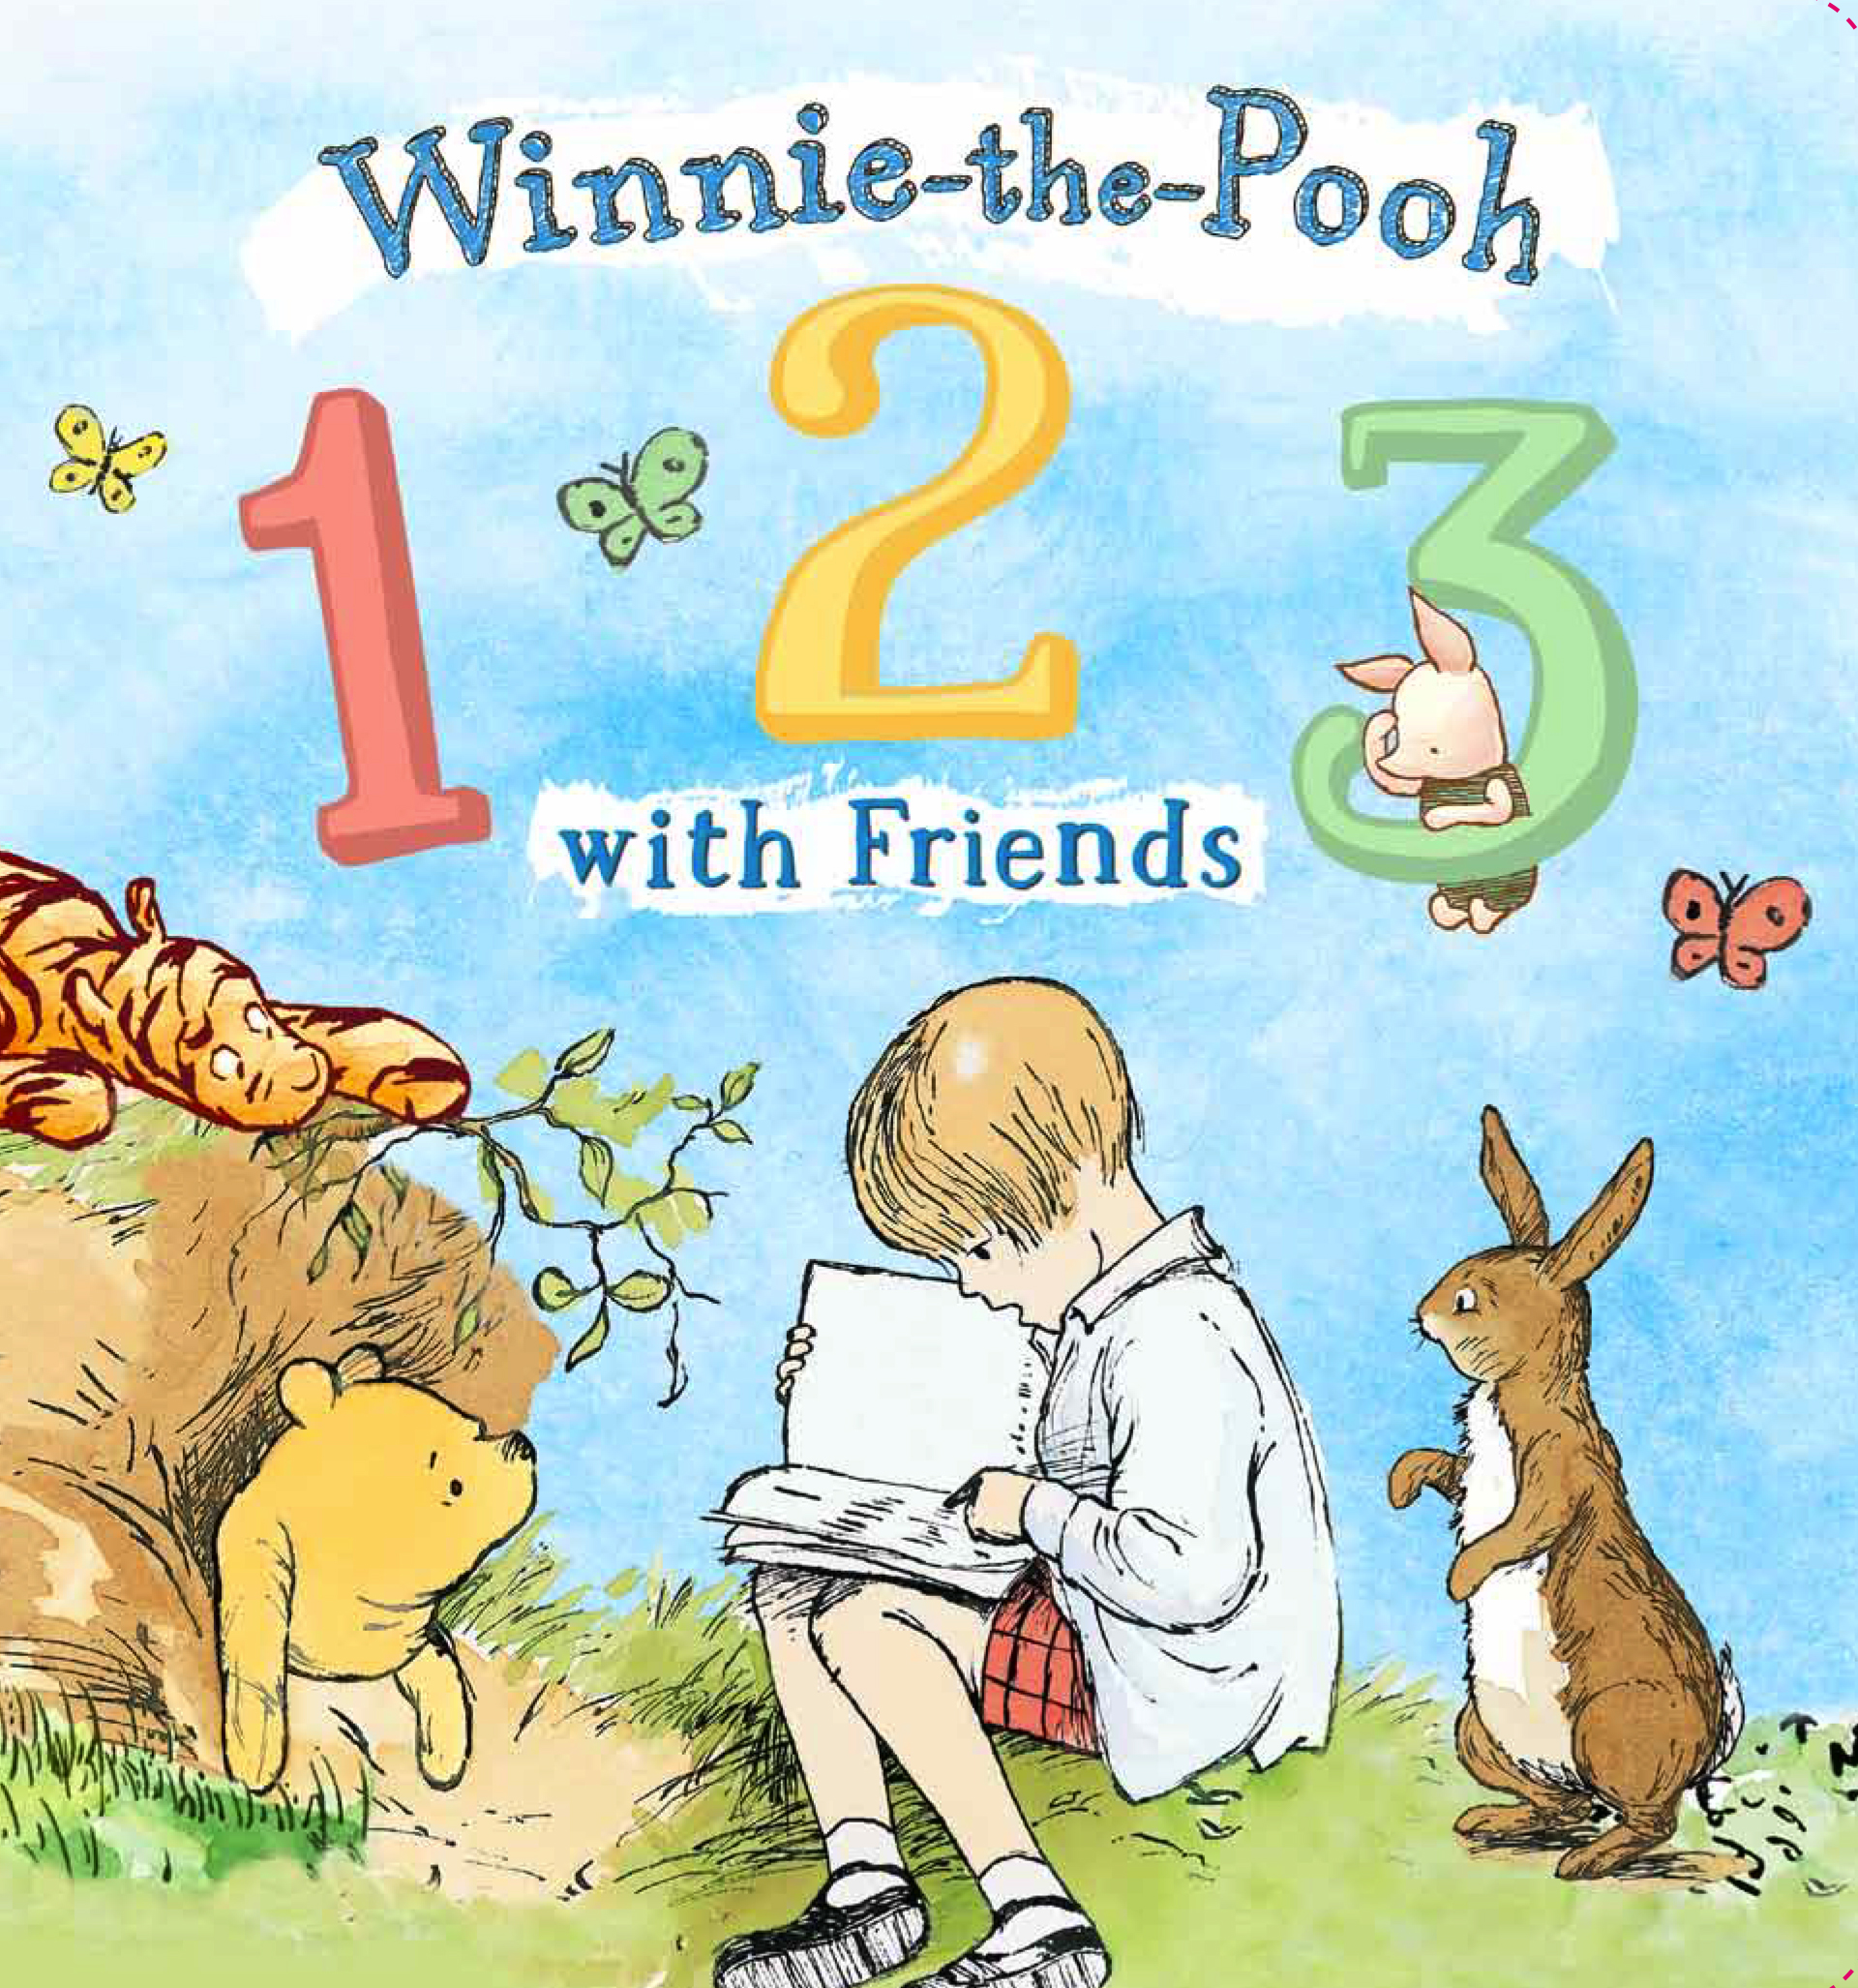 Winnie the Pooh: 123 with Friends